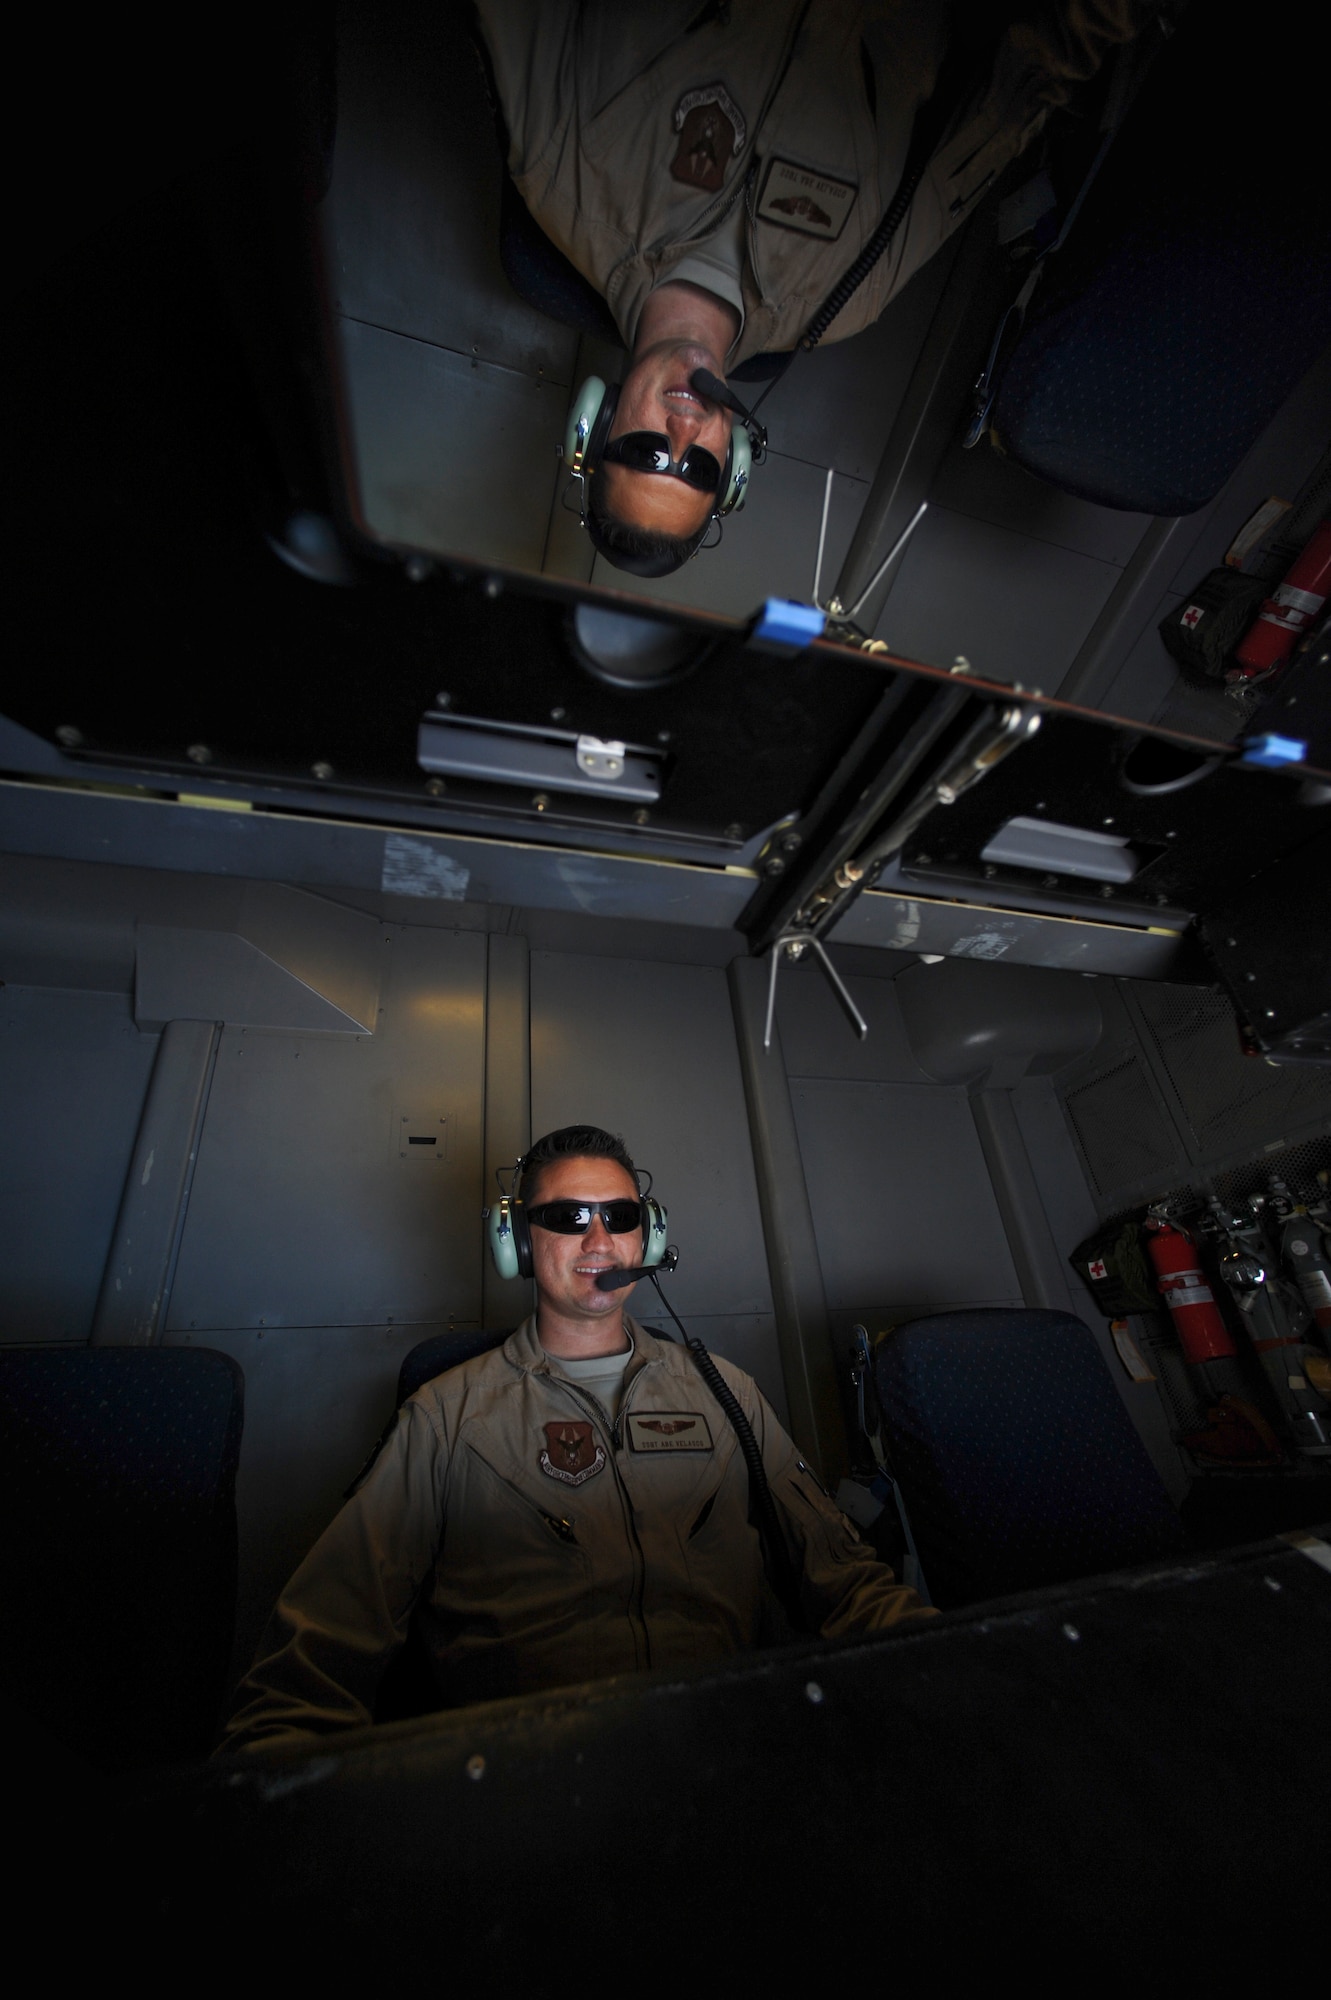 U.S. Air Force Staff Sgt. Abe Velasco, 908th Expeditionary Refueling Squadron KC-10 Extender in-flight refueling operator, controls the boom above the Arabian Gulf, Feb. 2, 2018. The KC-10 mission flew in support of Operation Inherent Resolve, a Combined Joint Task Force assembled to defeat ISIS in designated areas of Iraq and Syria. (U.S. Air Force photo by Airman 1st Class D. Blake Browning)